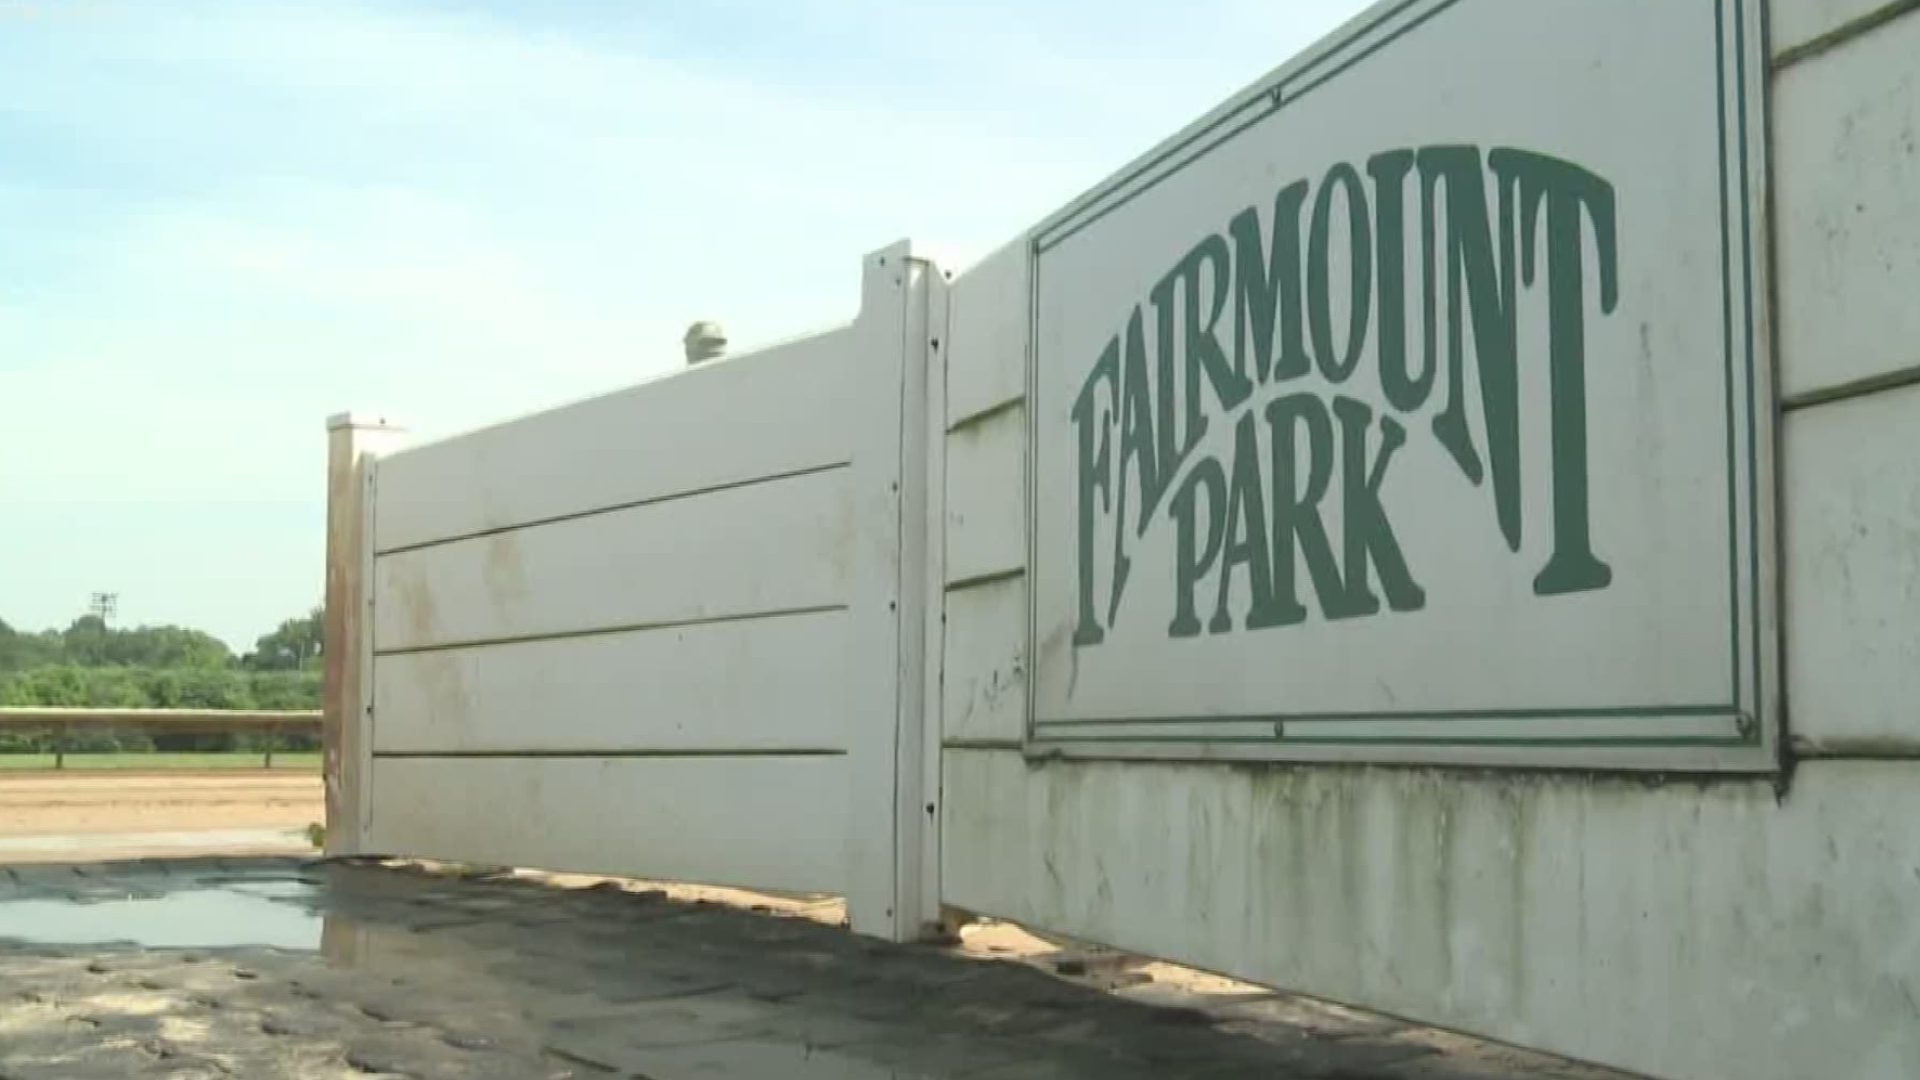 Fairmount Park could look quite a bit different in the coming years with a casino, sports book and more live racing planned for the track.